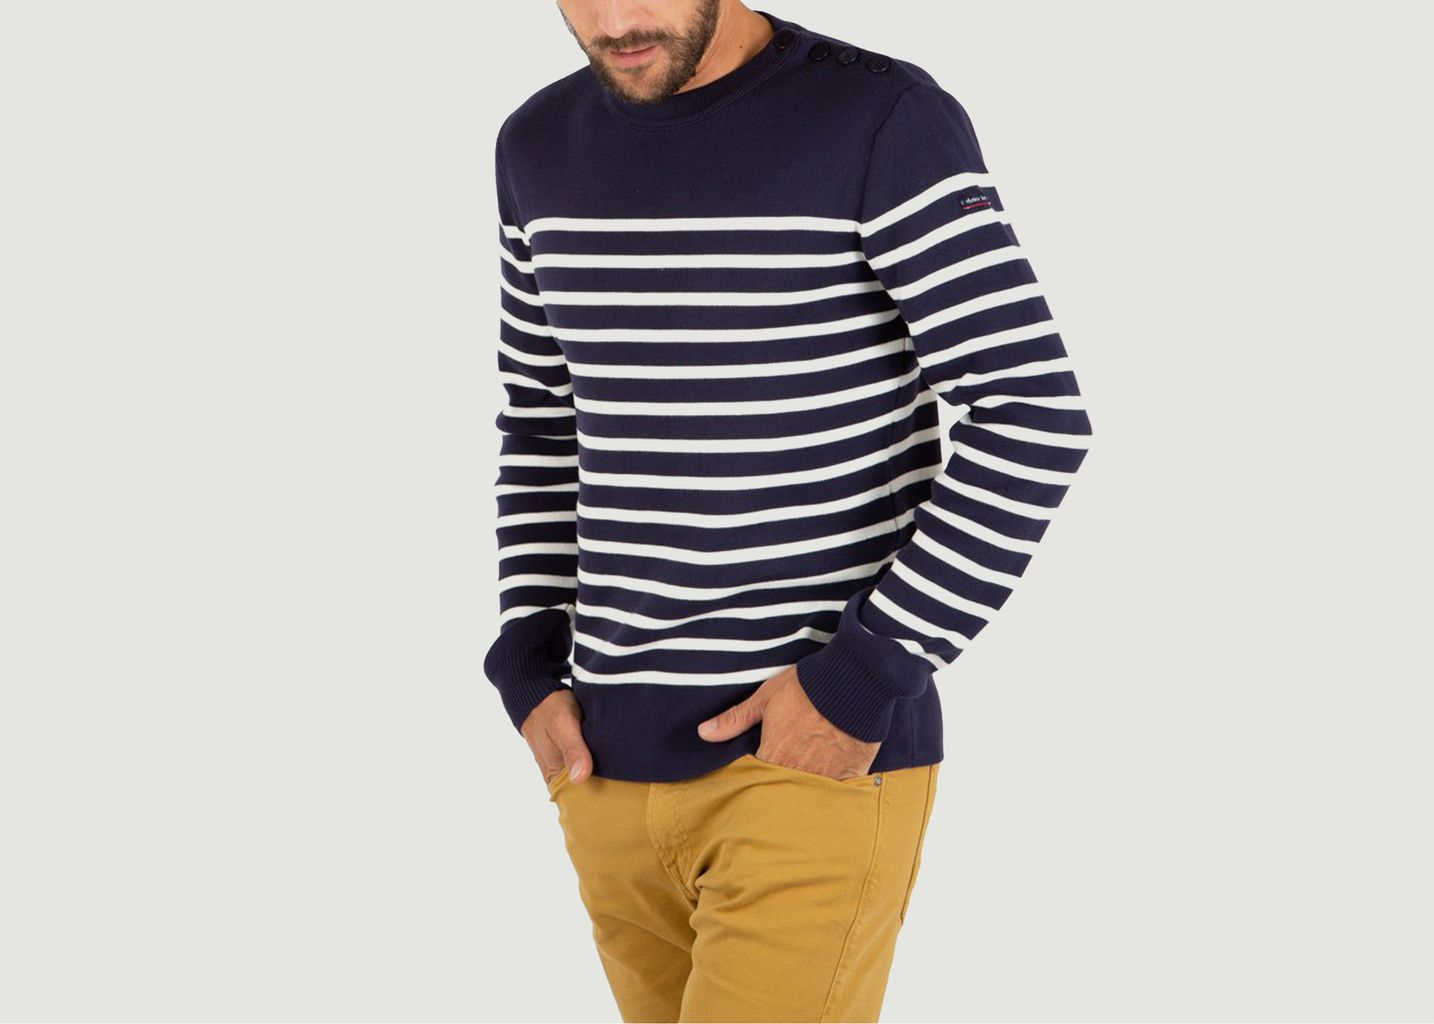 Armor Lux Groix Striped Navy Sweater